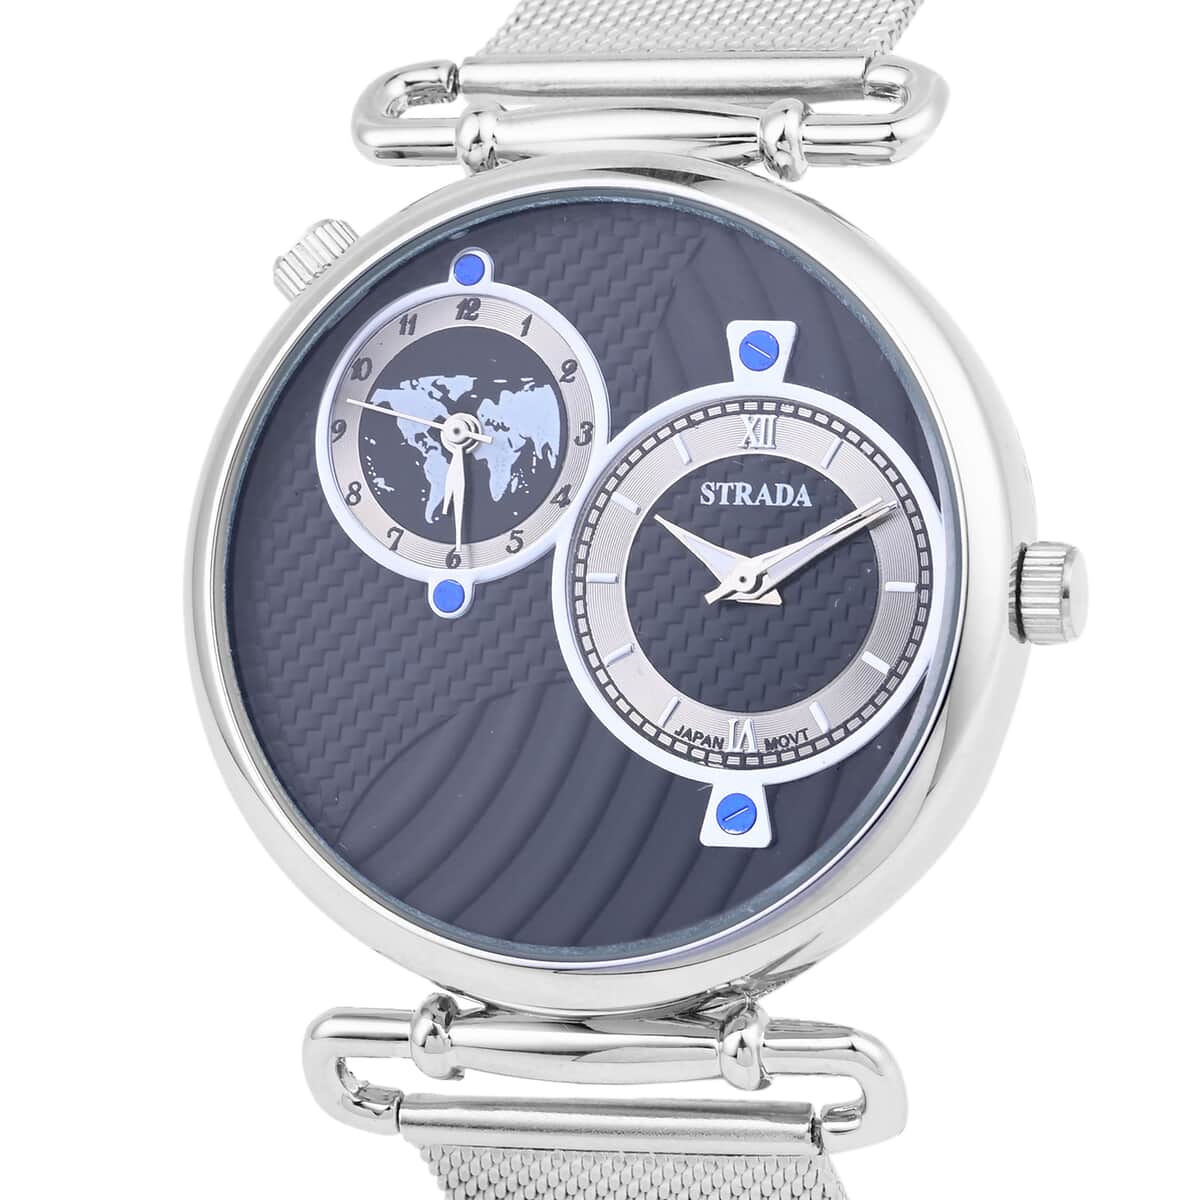 STRADA Double Japanese Movement Watch with Stainless Steel Mesh Strap (44mm), Dual Time Zones image number 3